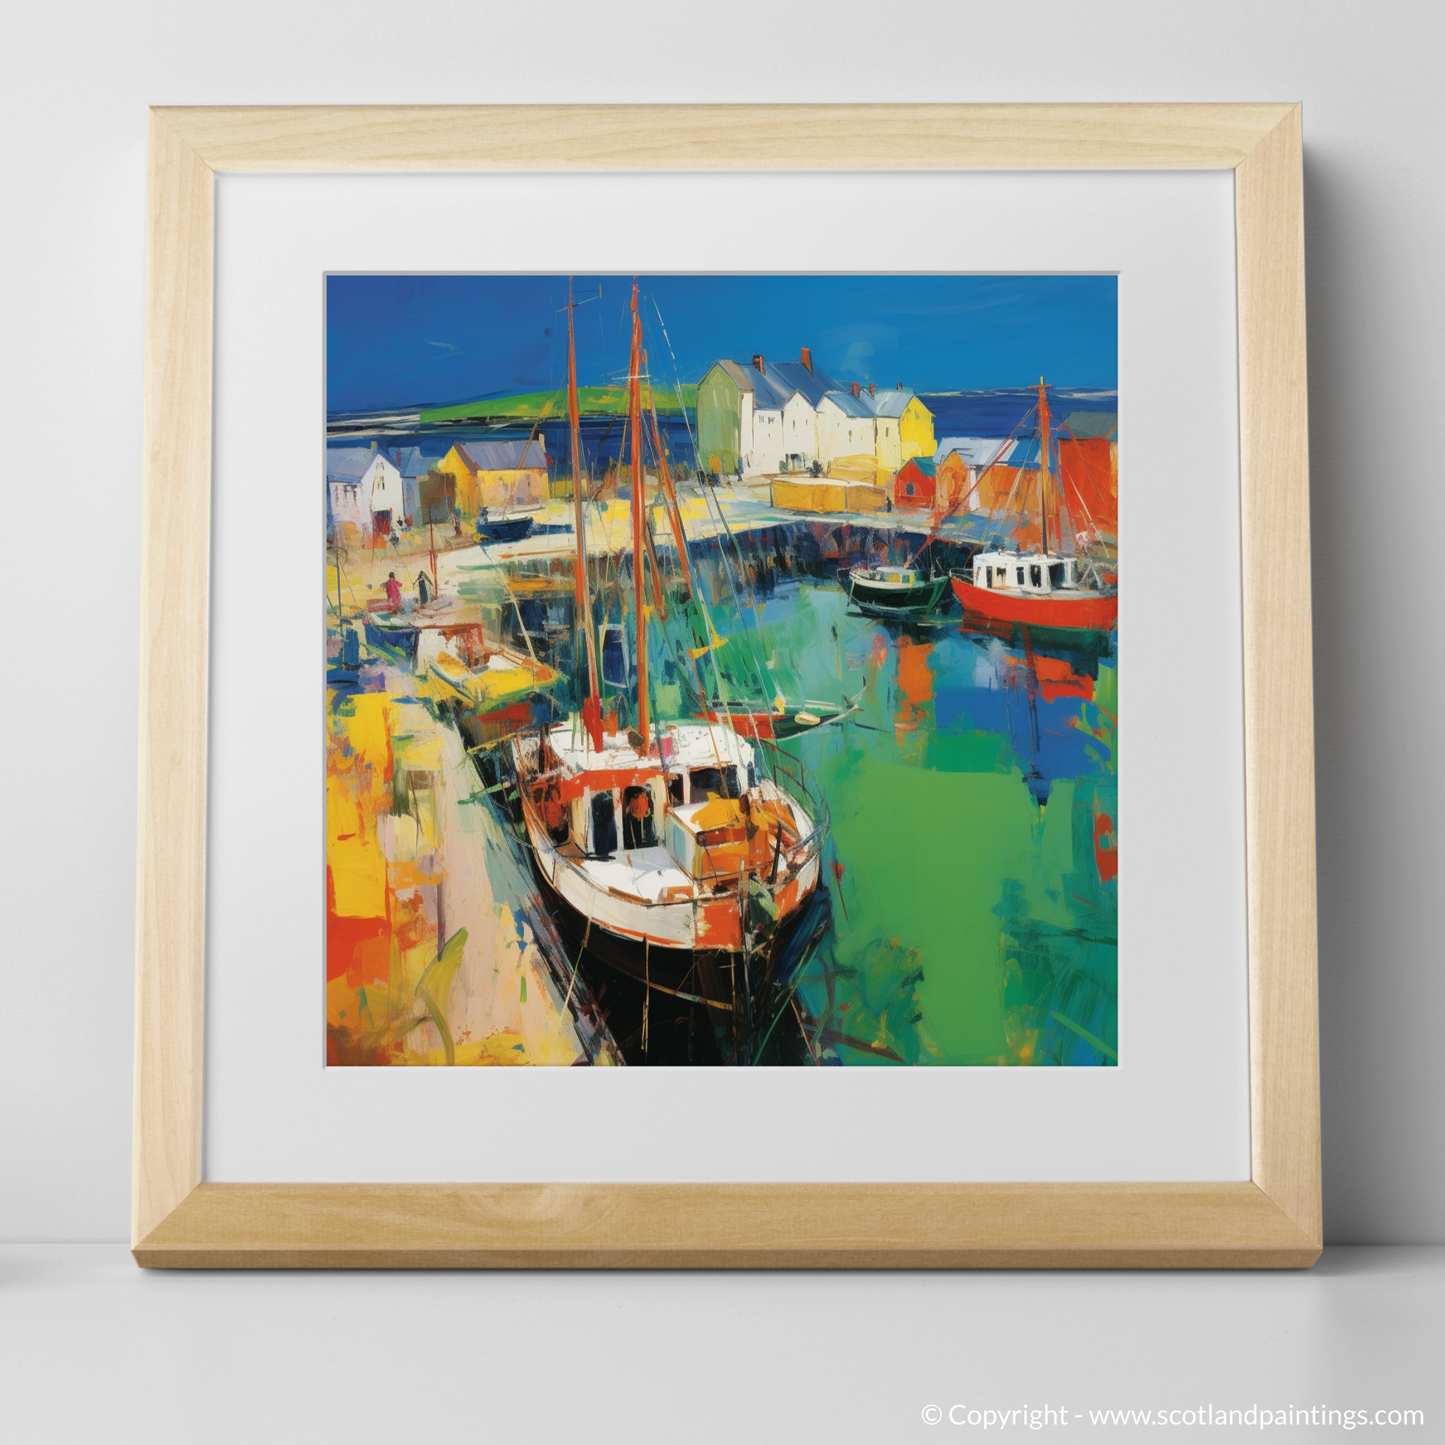 Charlestown Harbour Frenzy: An Abstract Expressionist Ode to Scottish Maritime Life